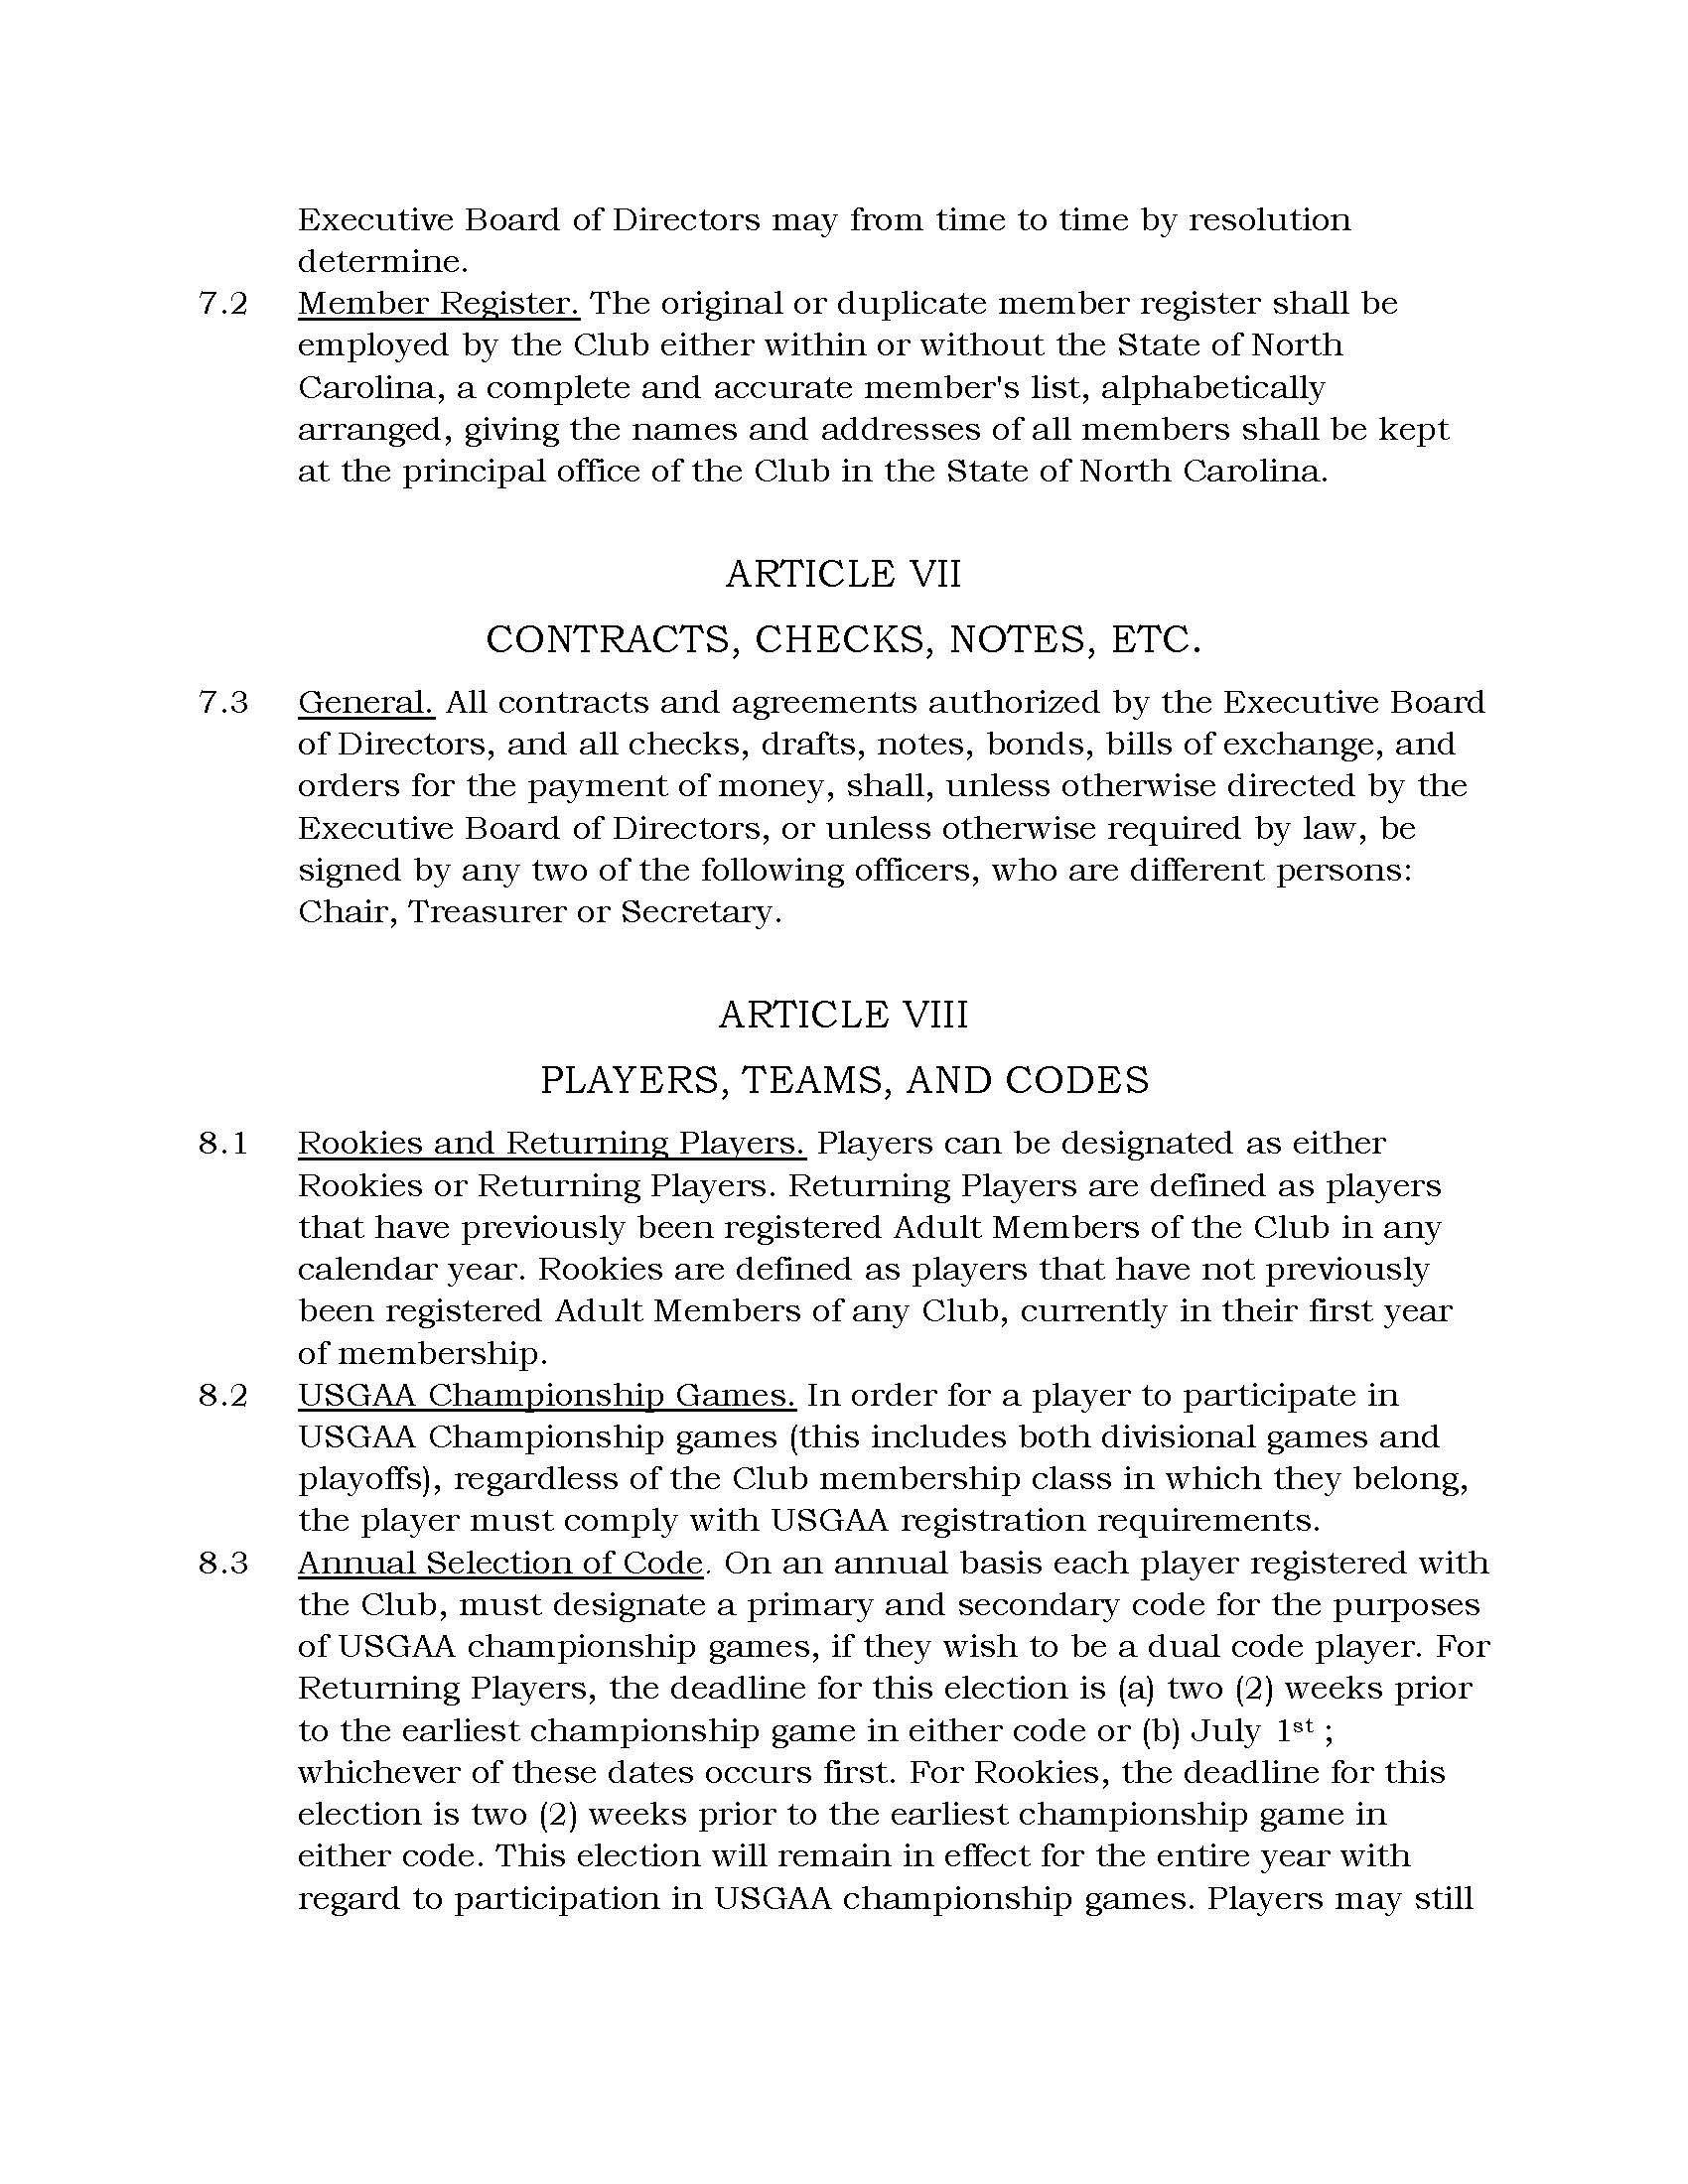 Bylaws of Charlotte James Connolly Gaelic Football Club_12.12.21_Page_11.jpg